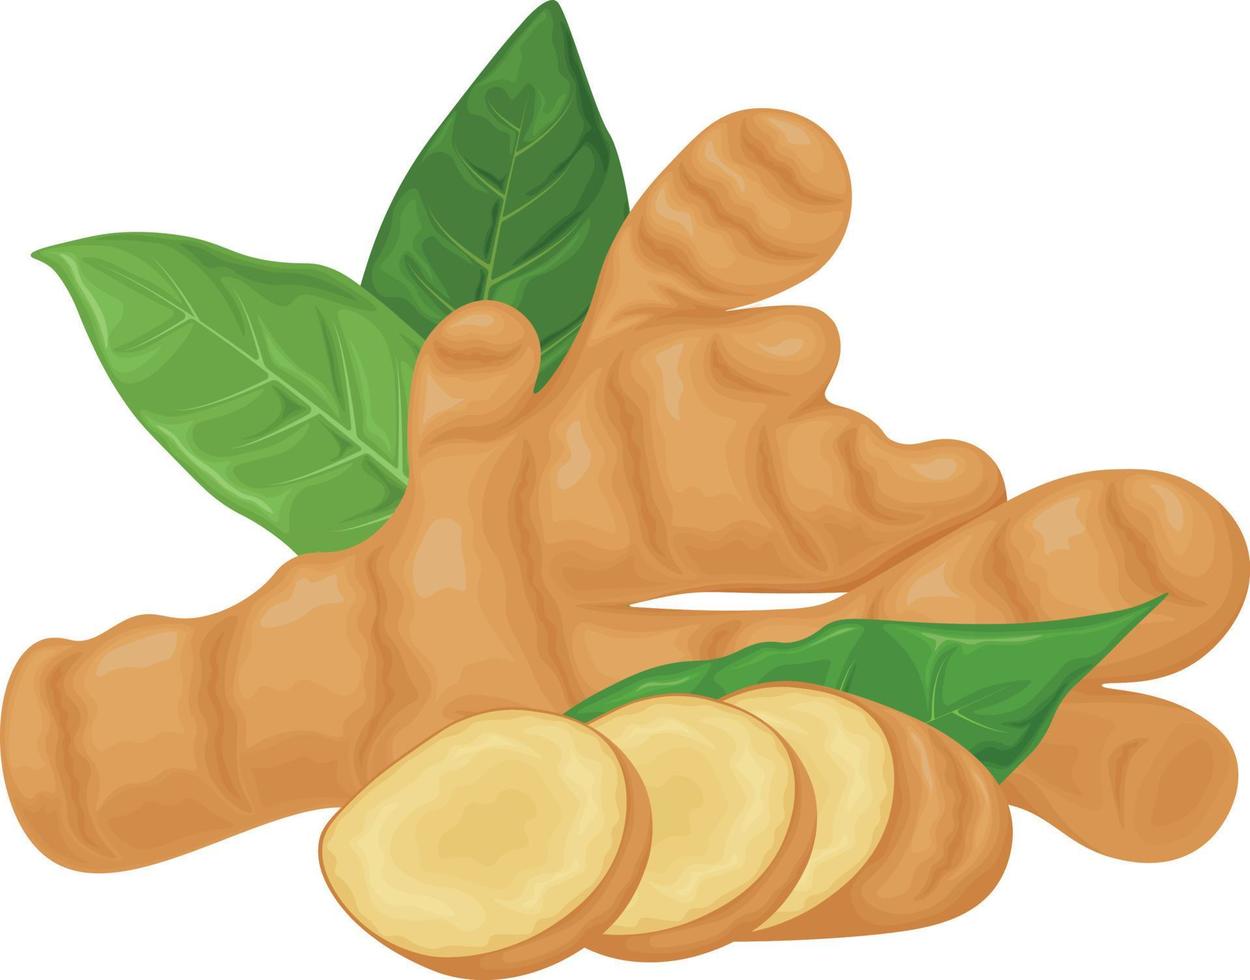 Ginger. Vector image of ginger with mint leaves. Medicinal plant in cartoon style. Isolated on a white background